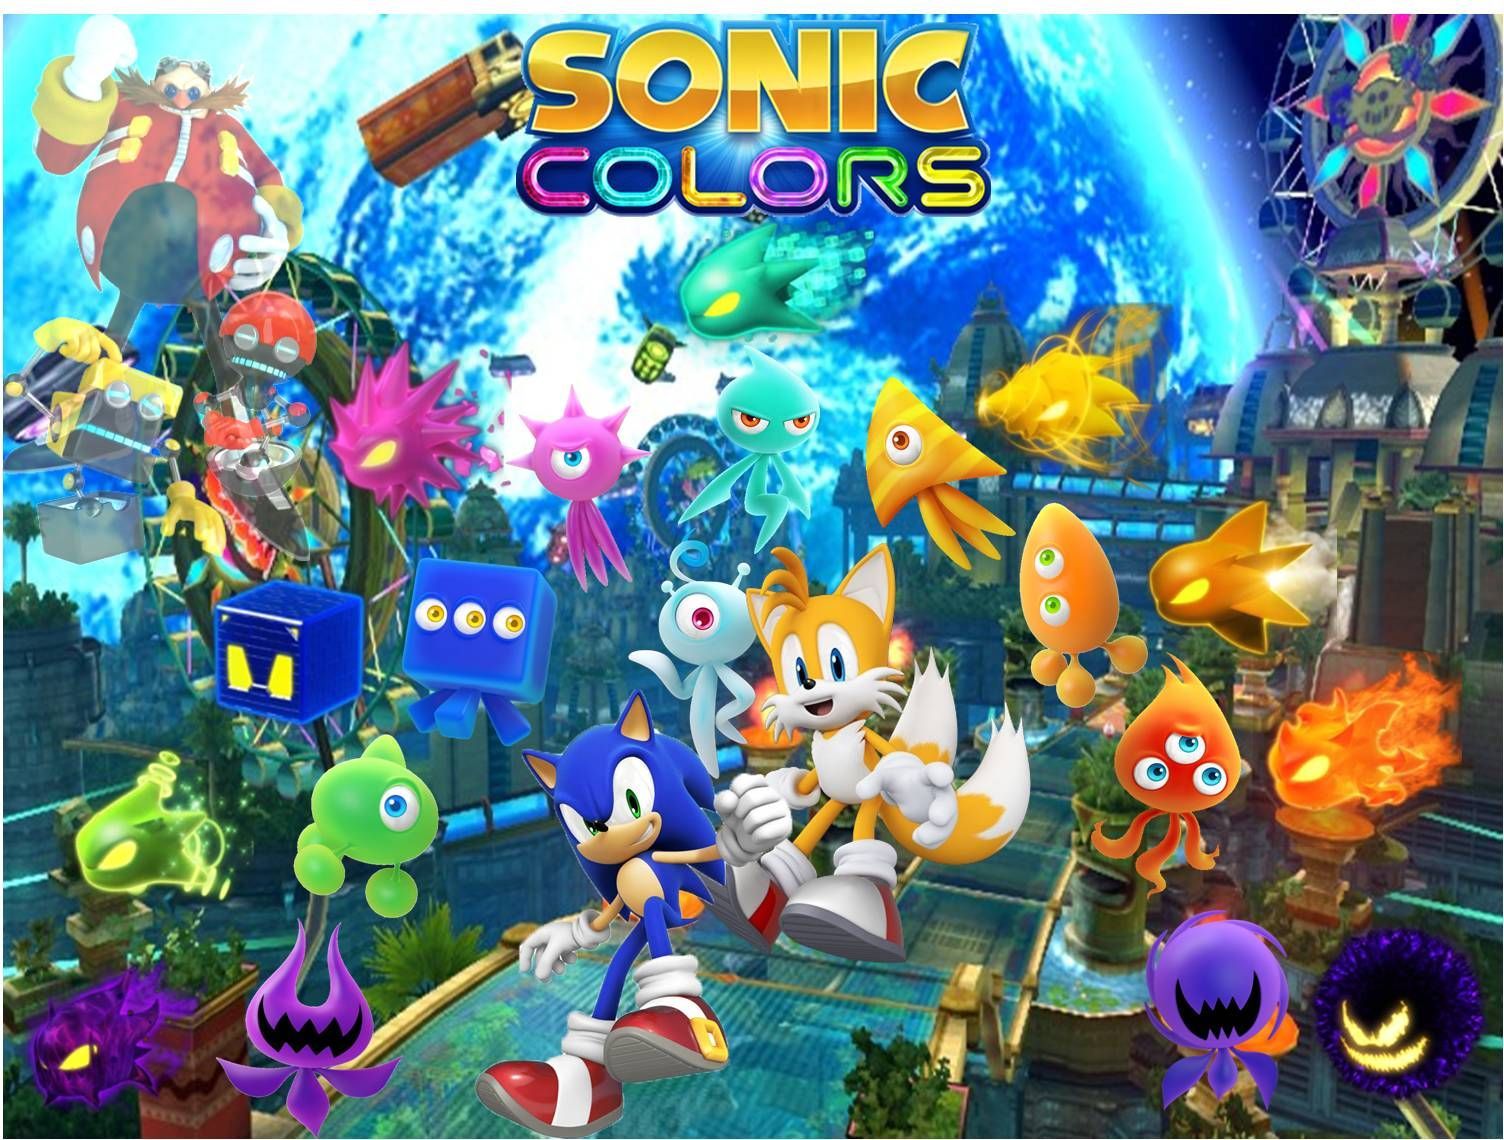 Sonic Colors. Finally. the 3D Sonic game we've been waiting